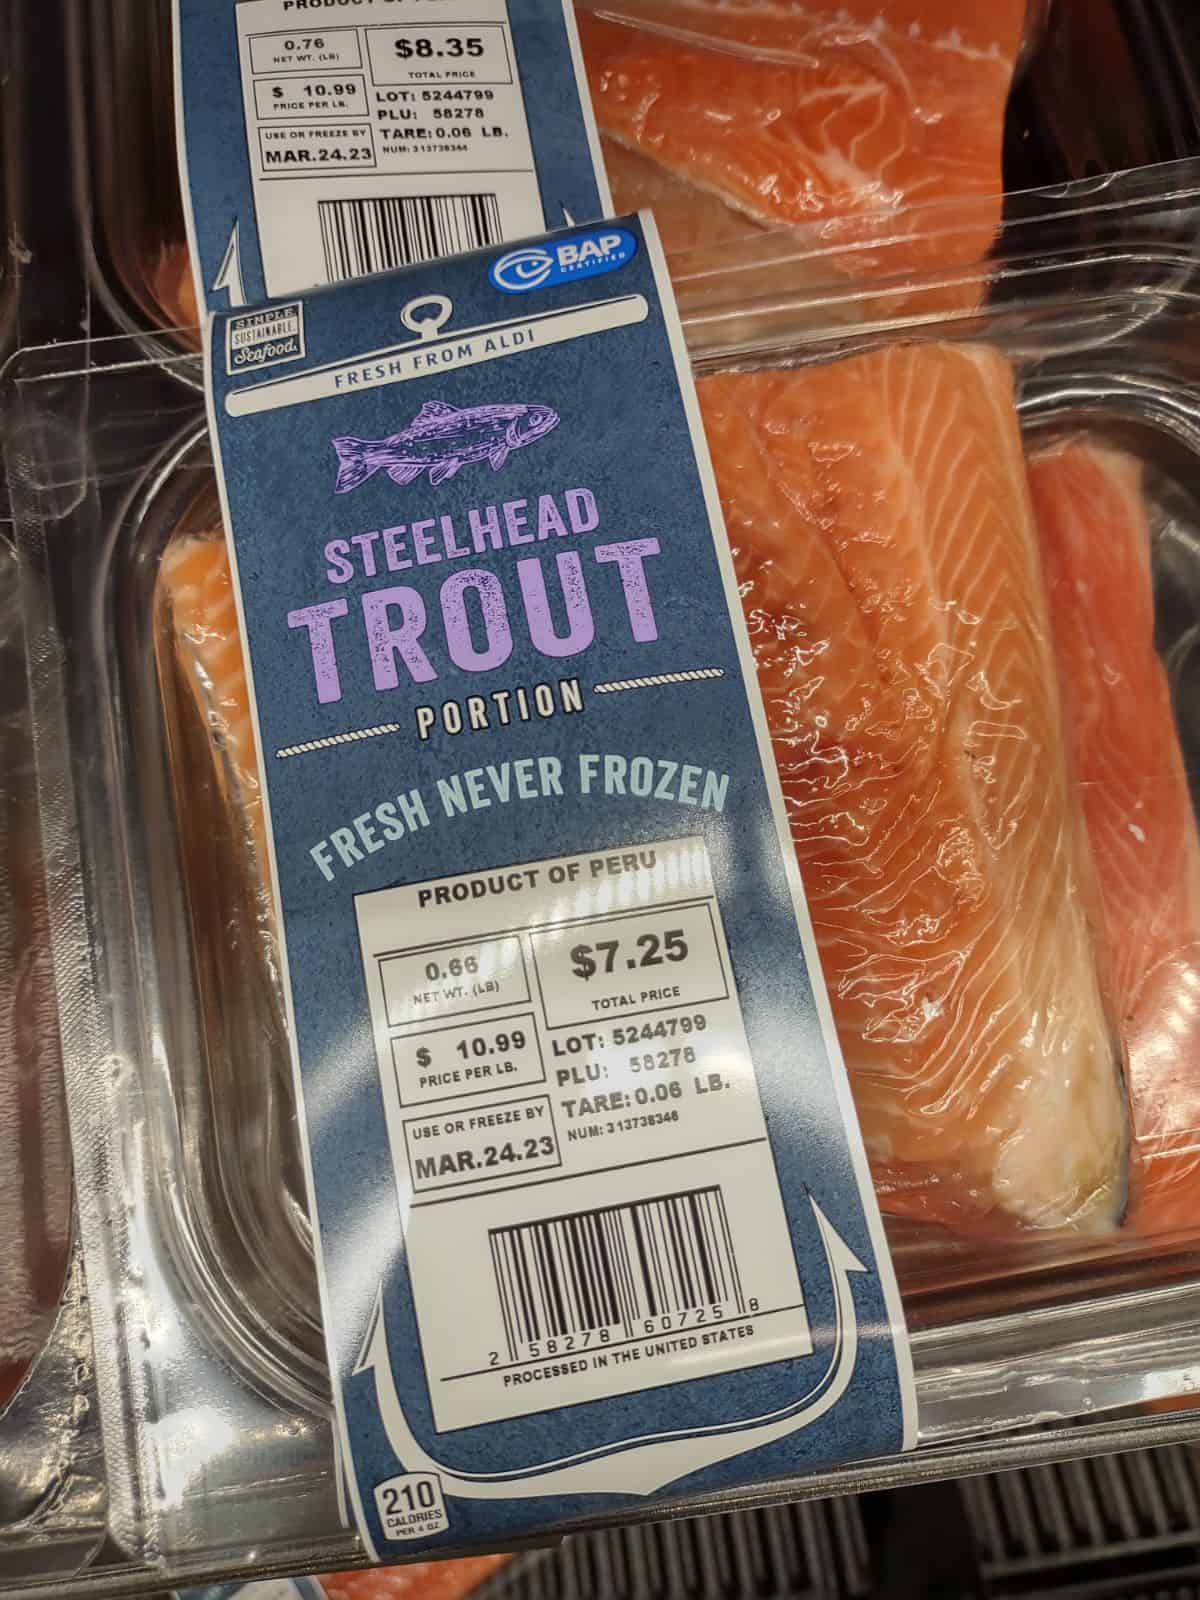 Packages of Fresh Never Frozen Steelhead Trout Portions.